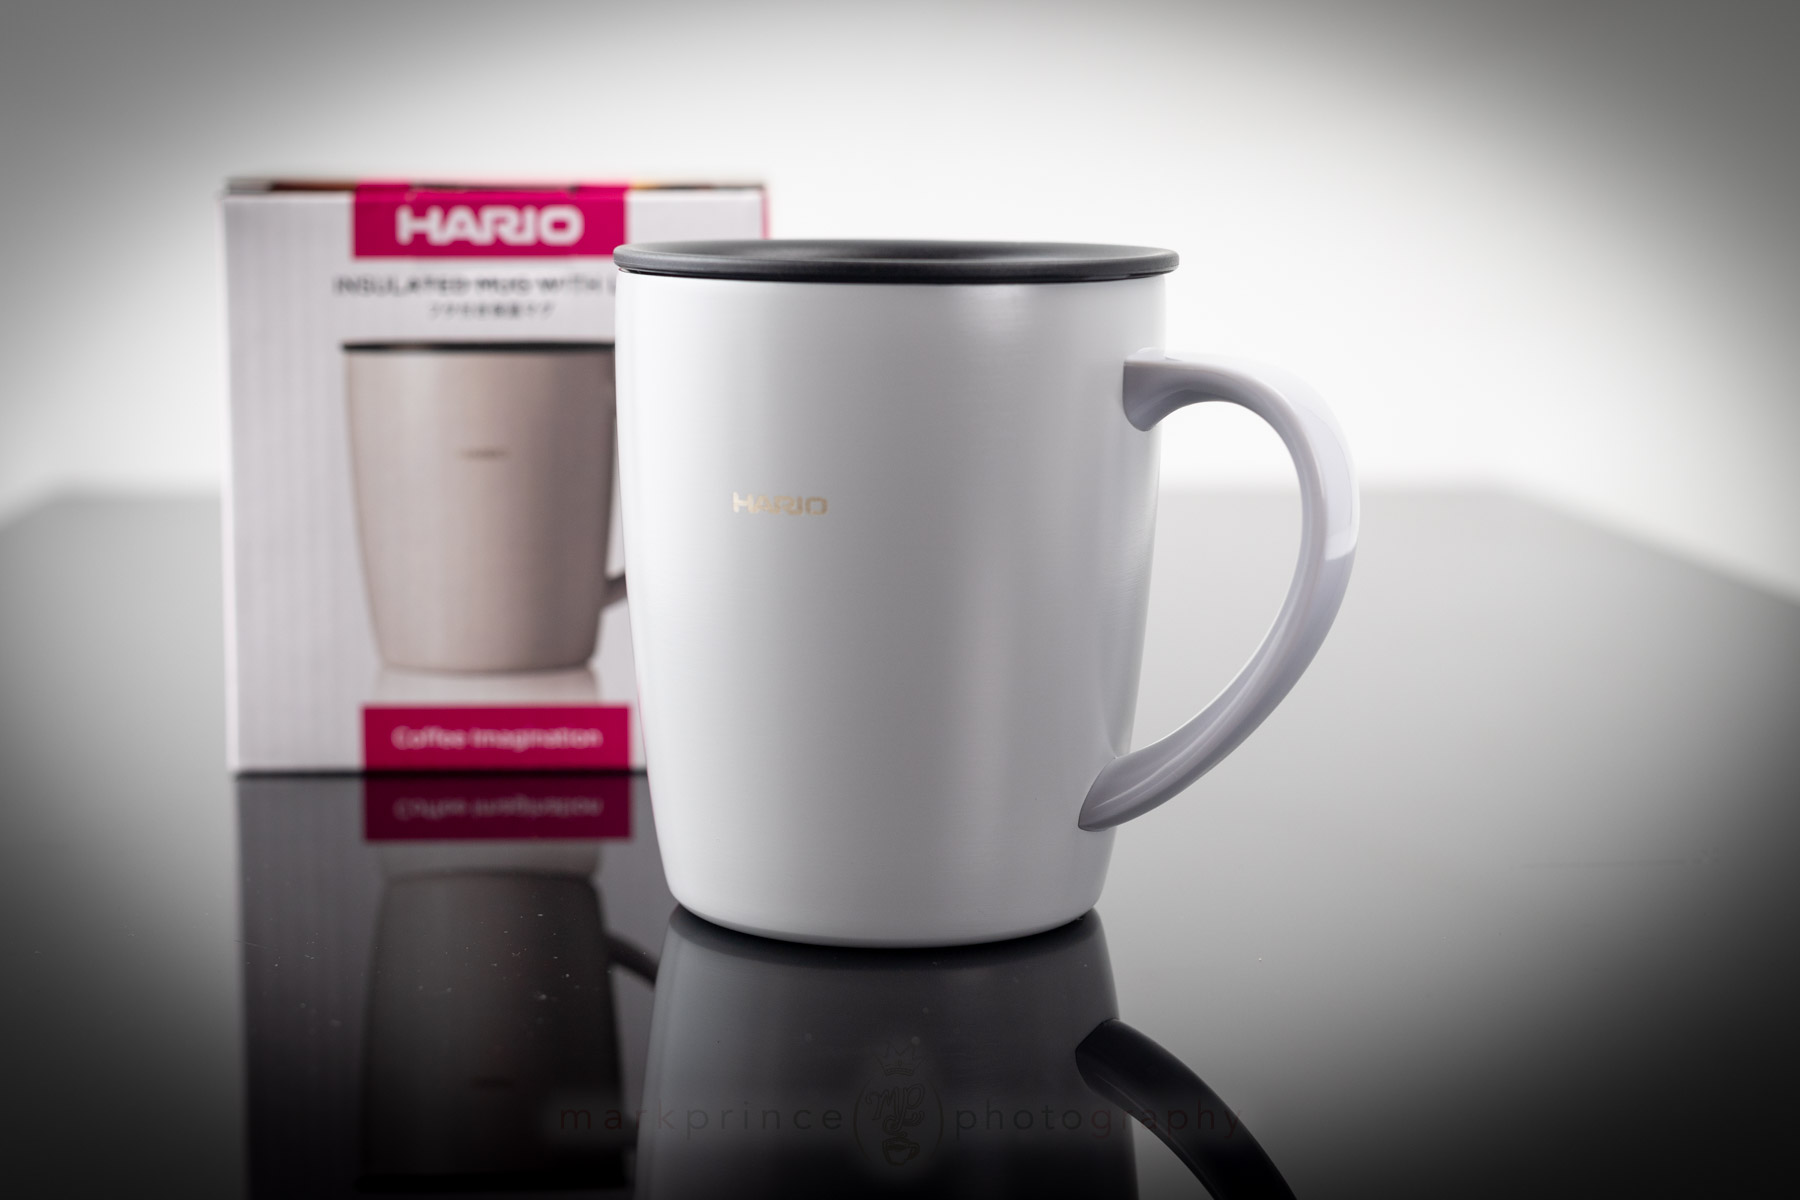 Review: A smart coffee mug that maintains your ideal temperature